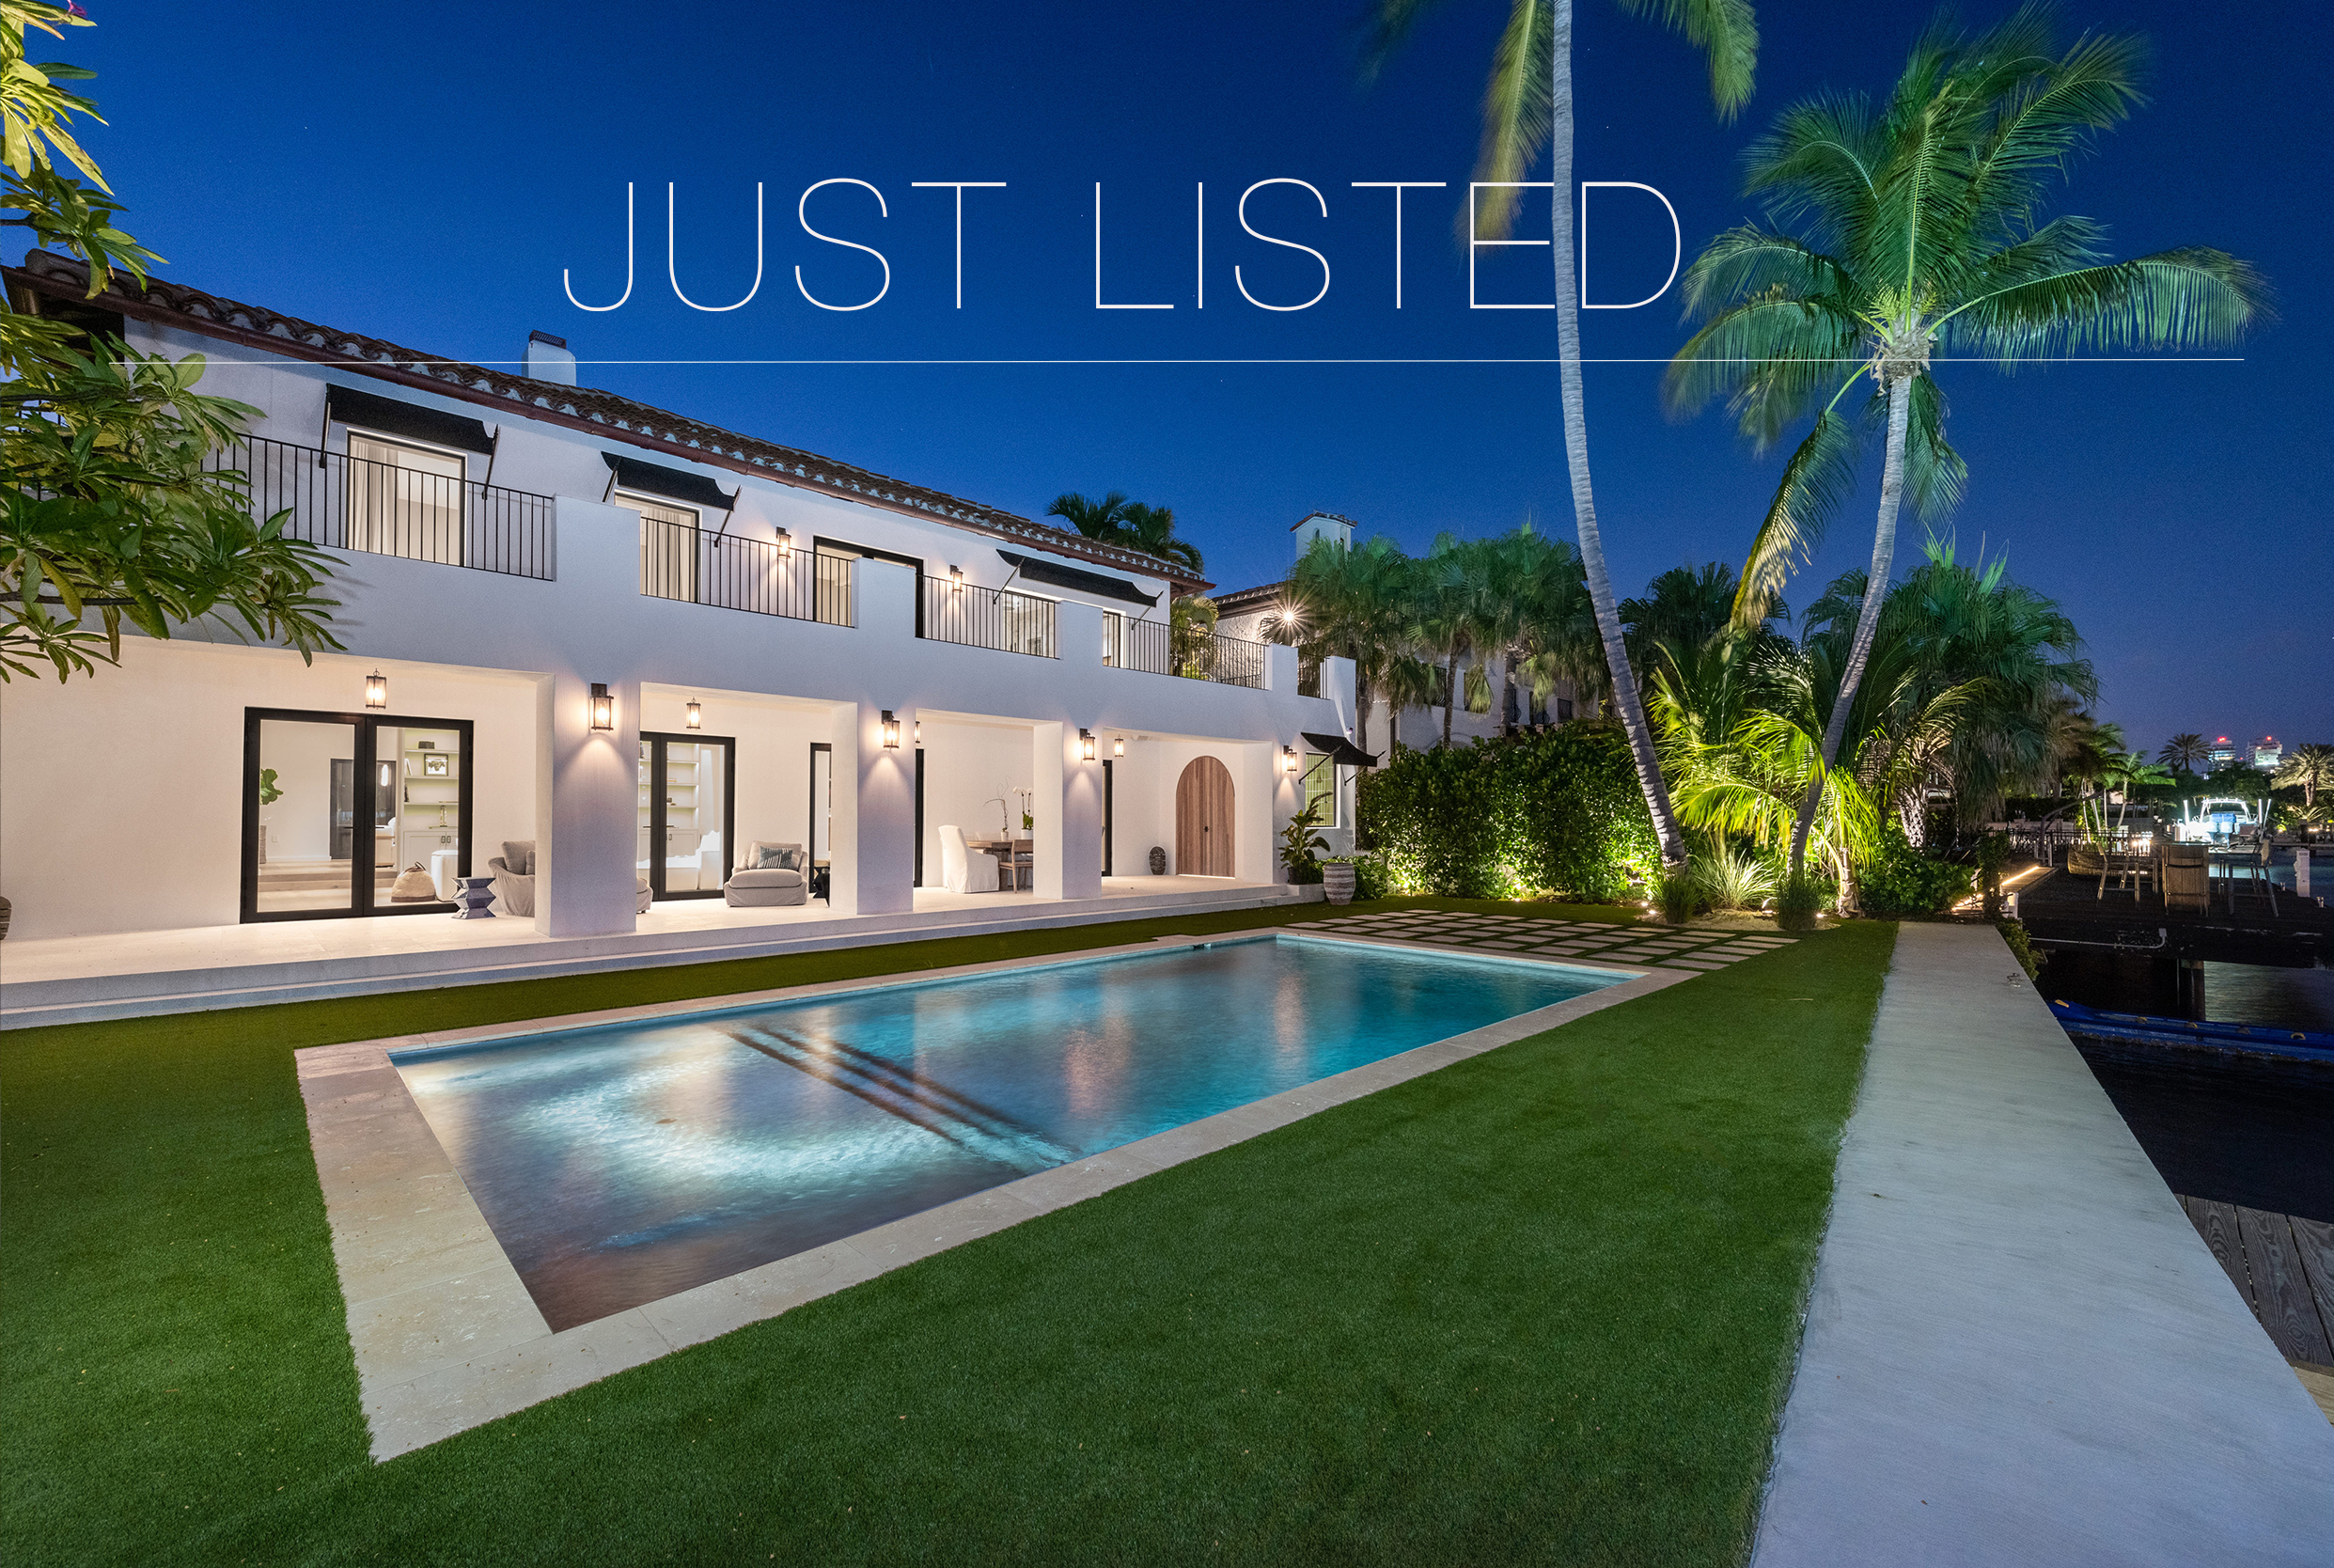 Just Listed by Nelson Gonzalez | Remodeled Luxury Waterfront Home in Miami Beach